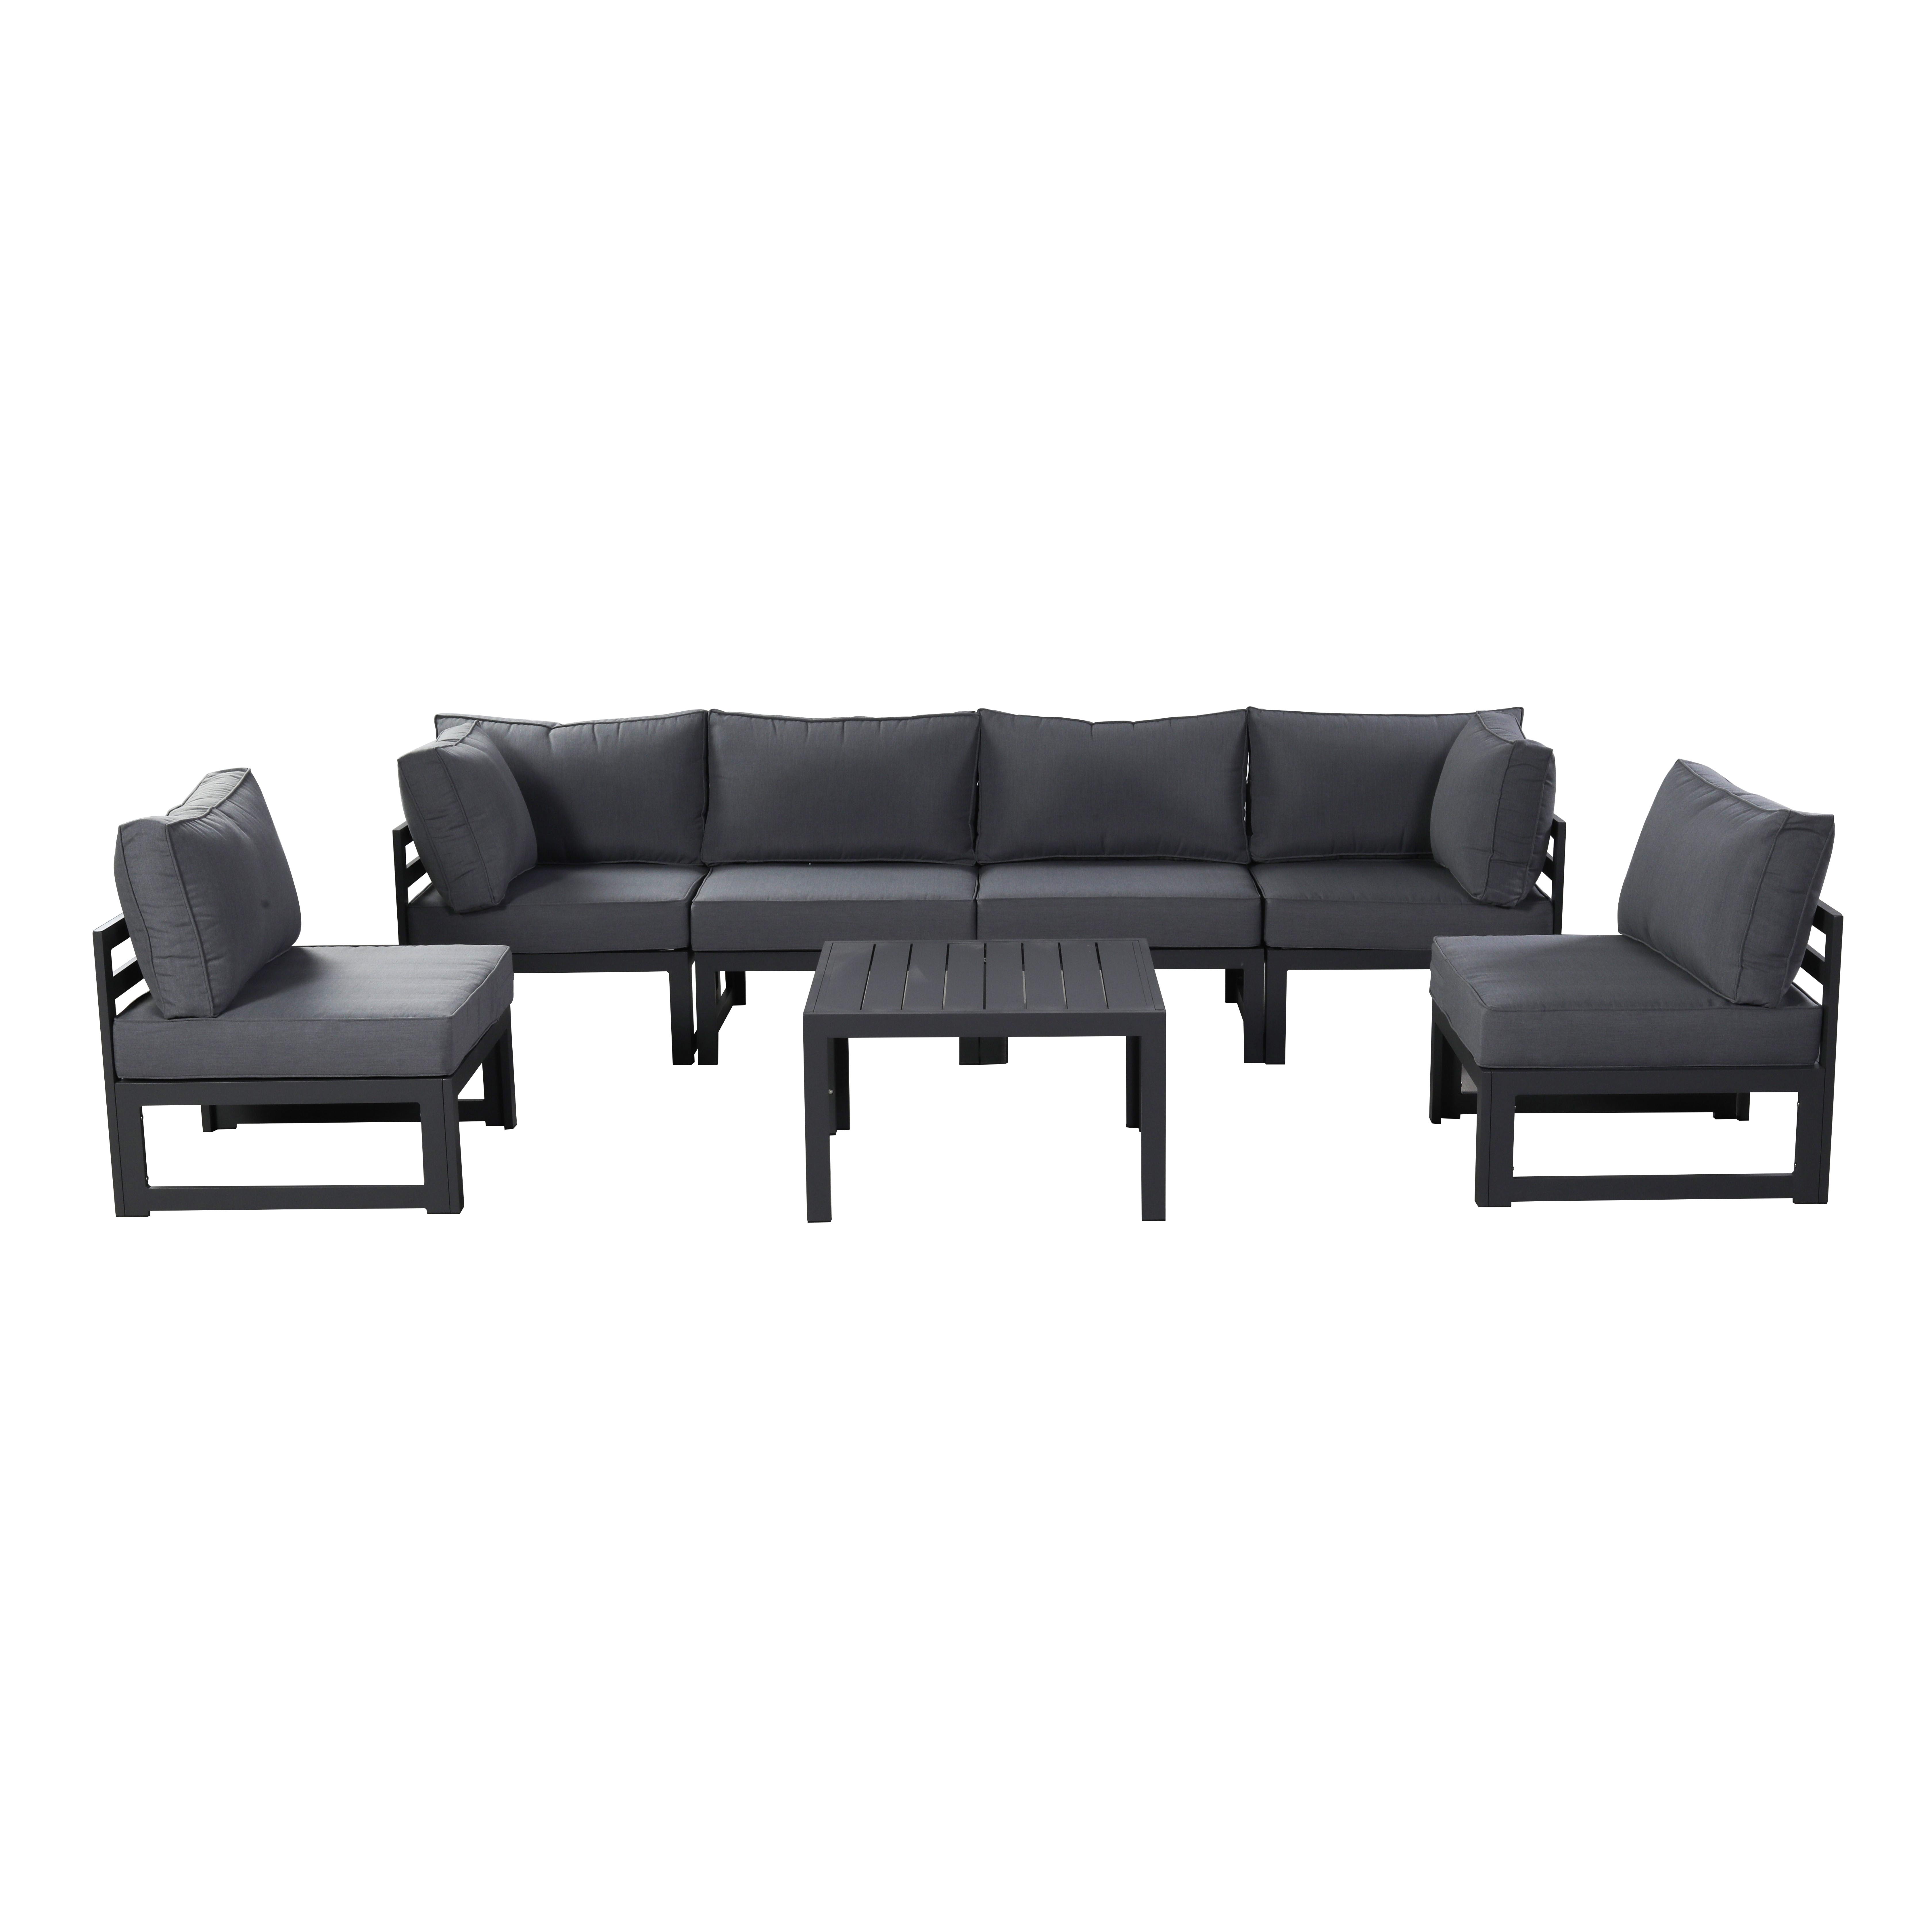 KAIXING Garden Aluminum Material 6 Seater Sectional Sofas with Coffee Table or Firepit Table Outdoor Set Featured Image